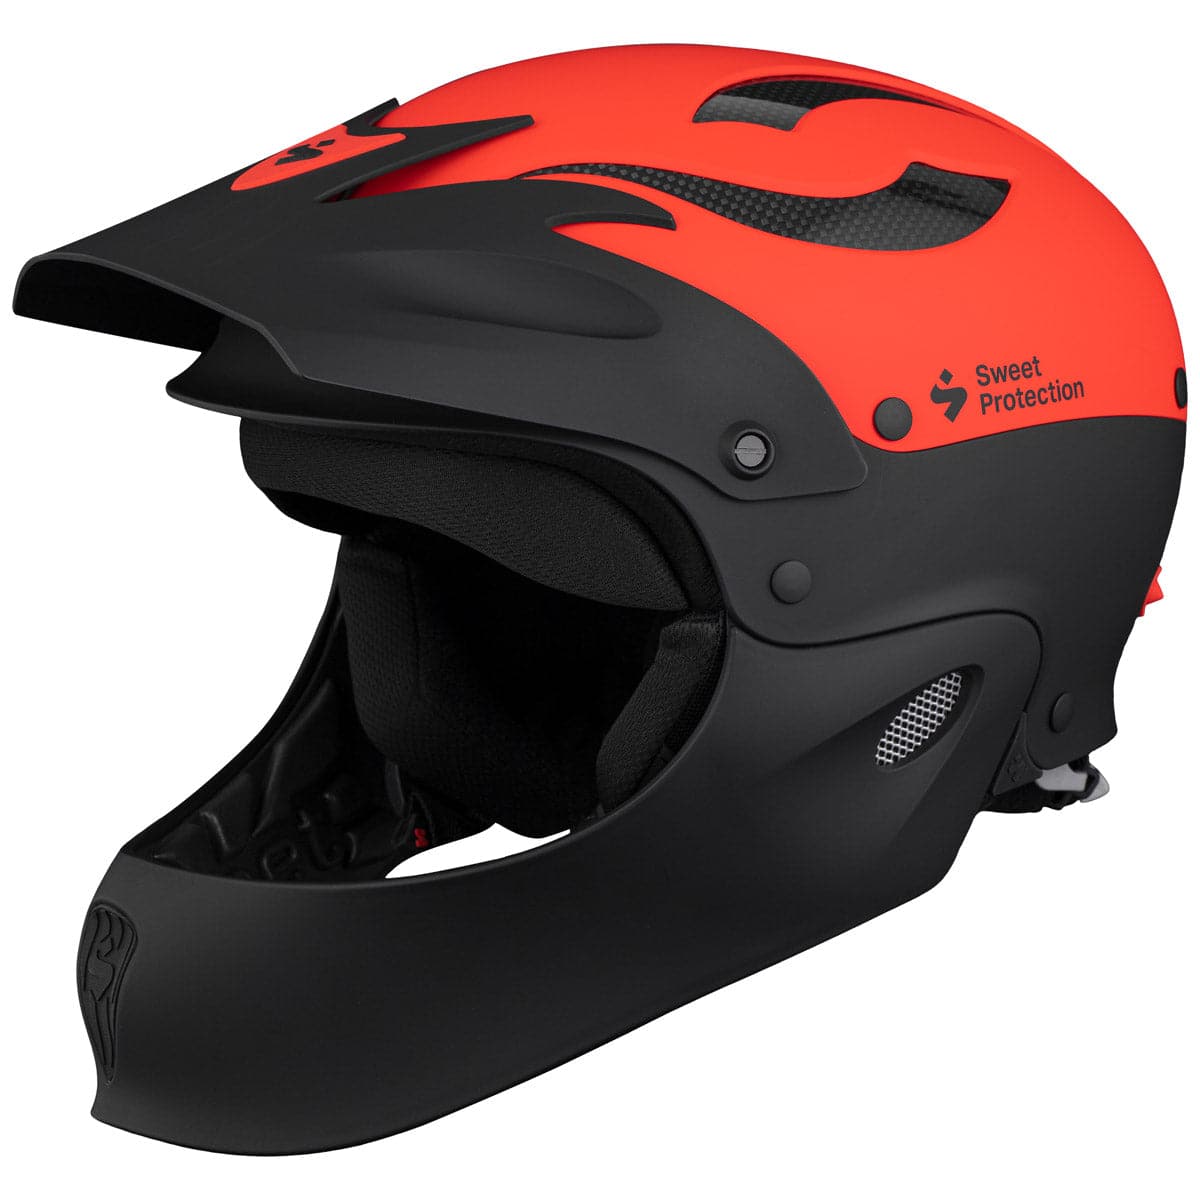 Featuring the Rocker Full Face Helmet helmet manufactured by Sweet shown here from a third angle.